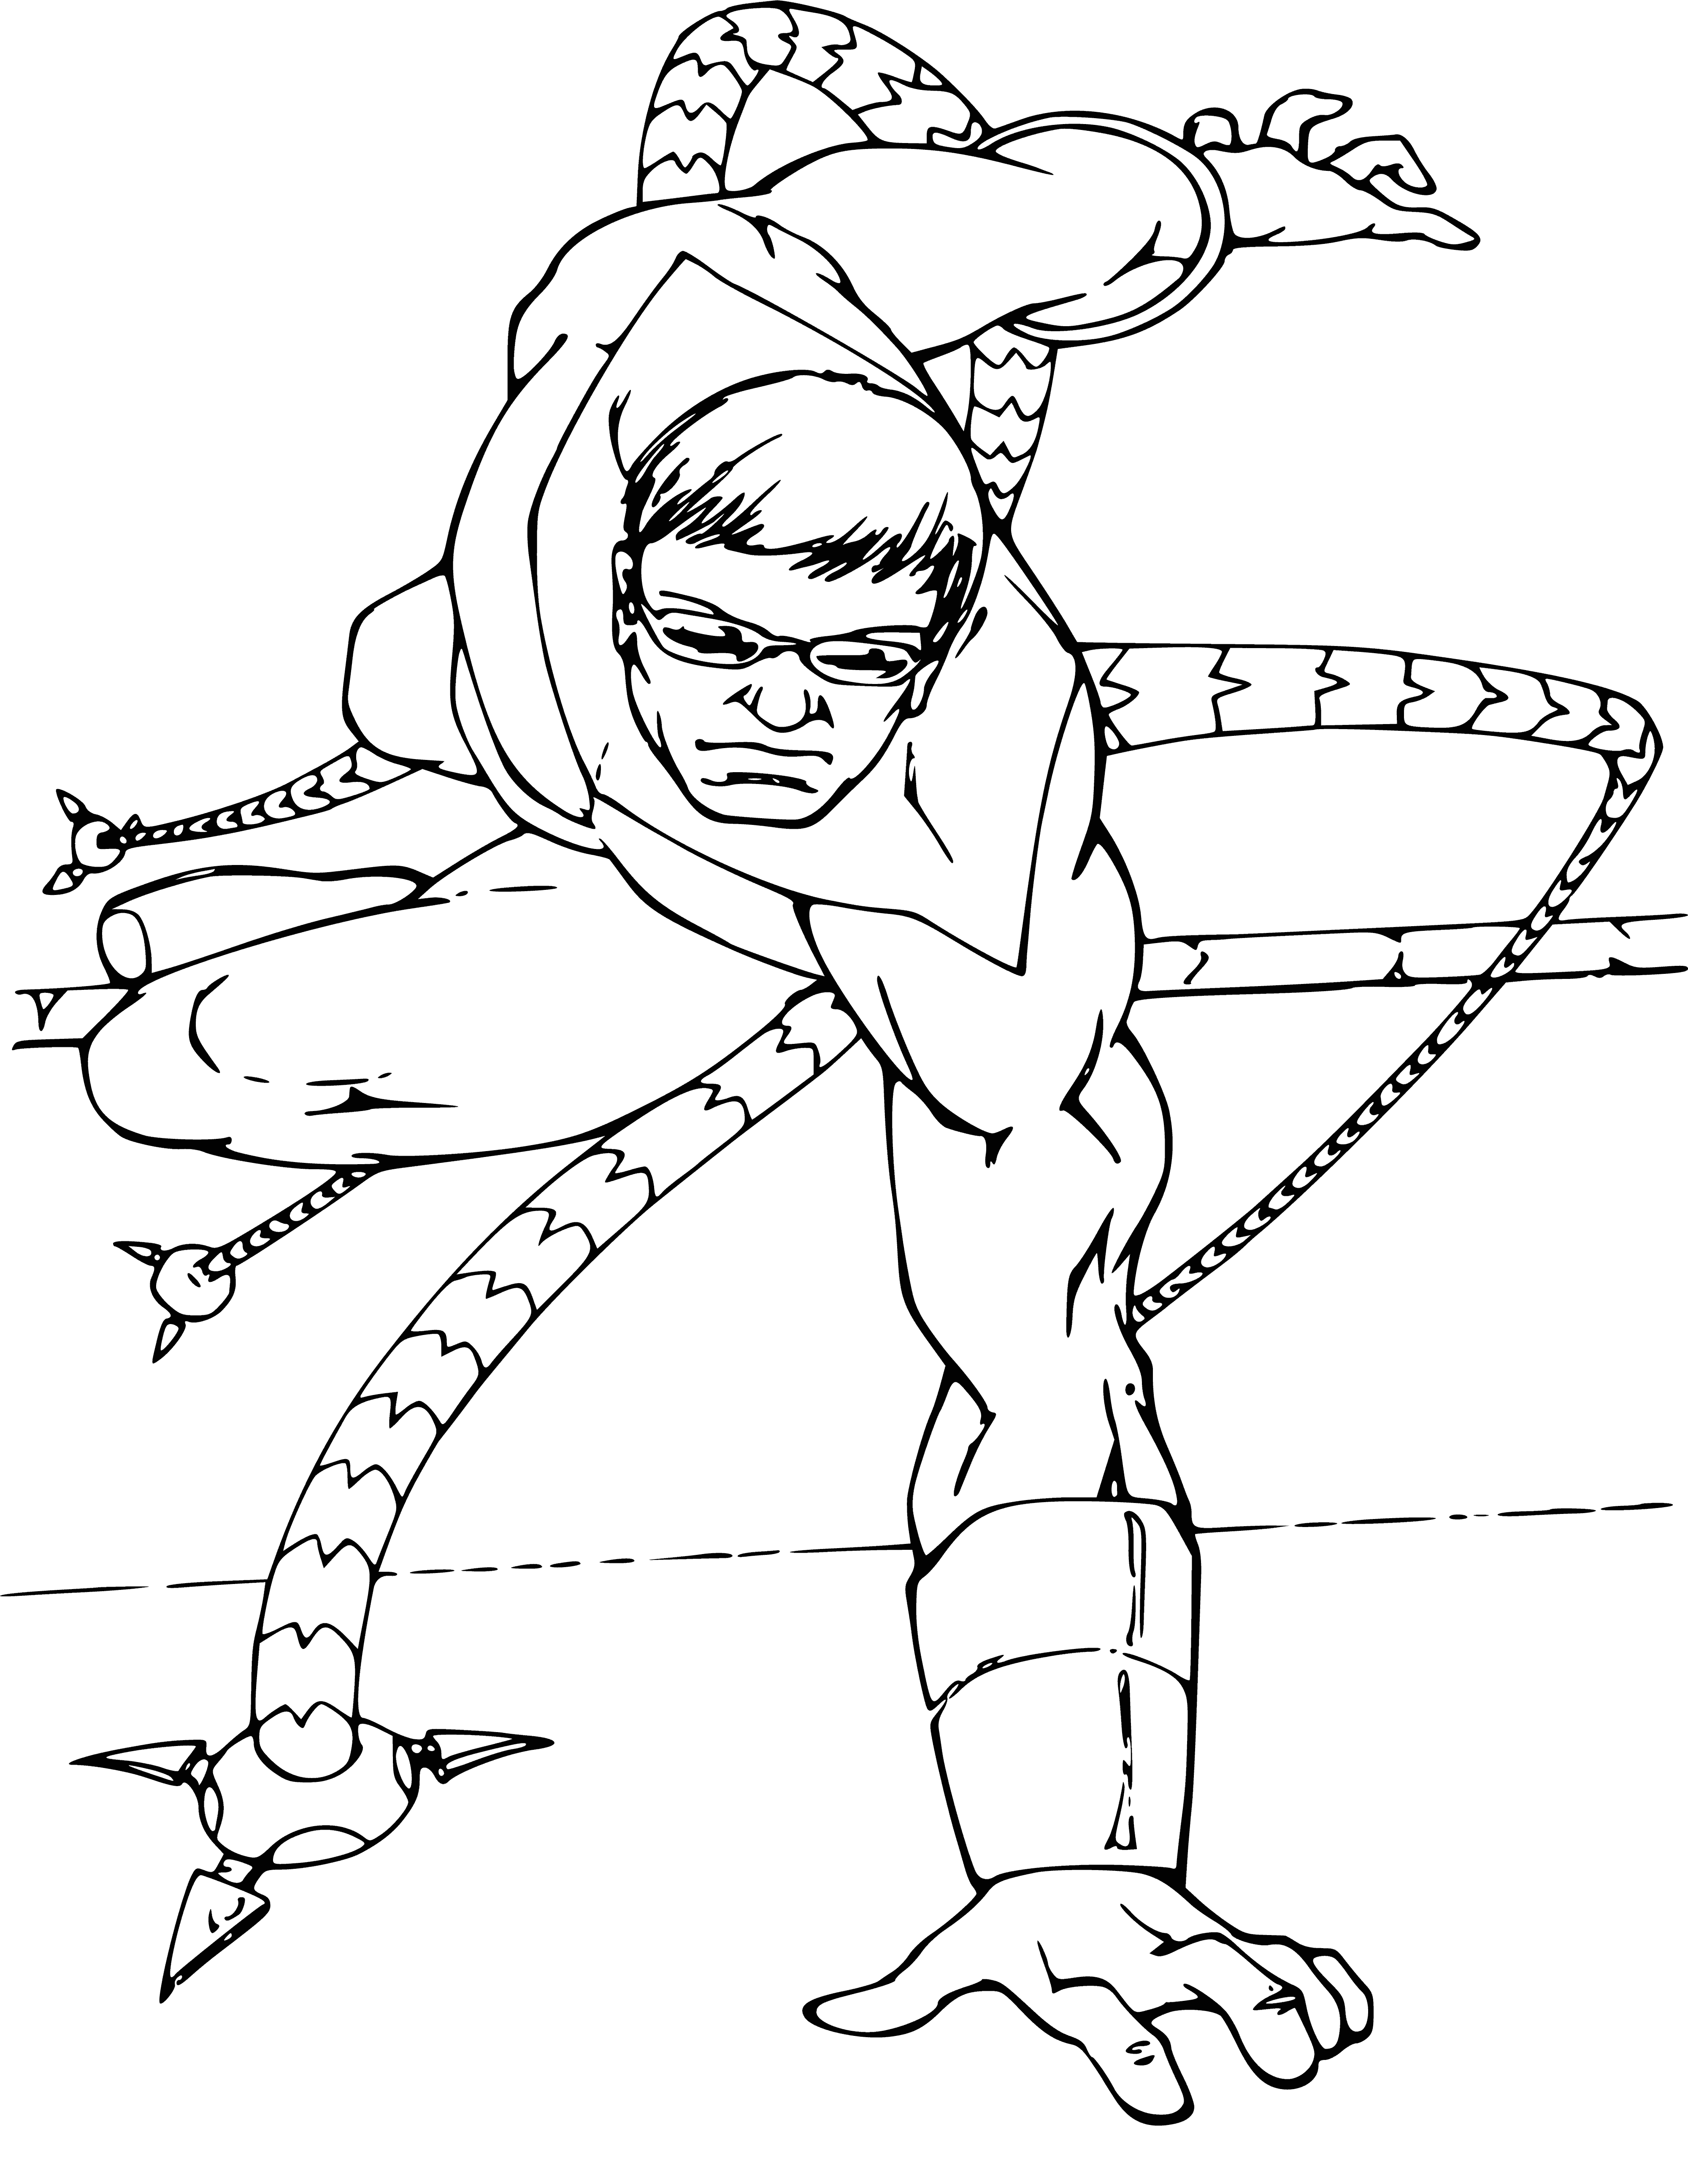 coloring page: Spiderman wins epic battle vs. Dr. Octopus, who is a purple-suited villain with metal tentacles. The web-slinger triumphs with his iconic red and blue suit intact! #spiderman